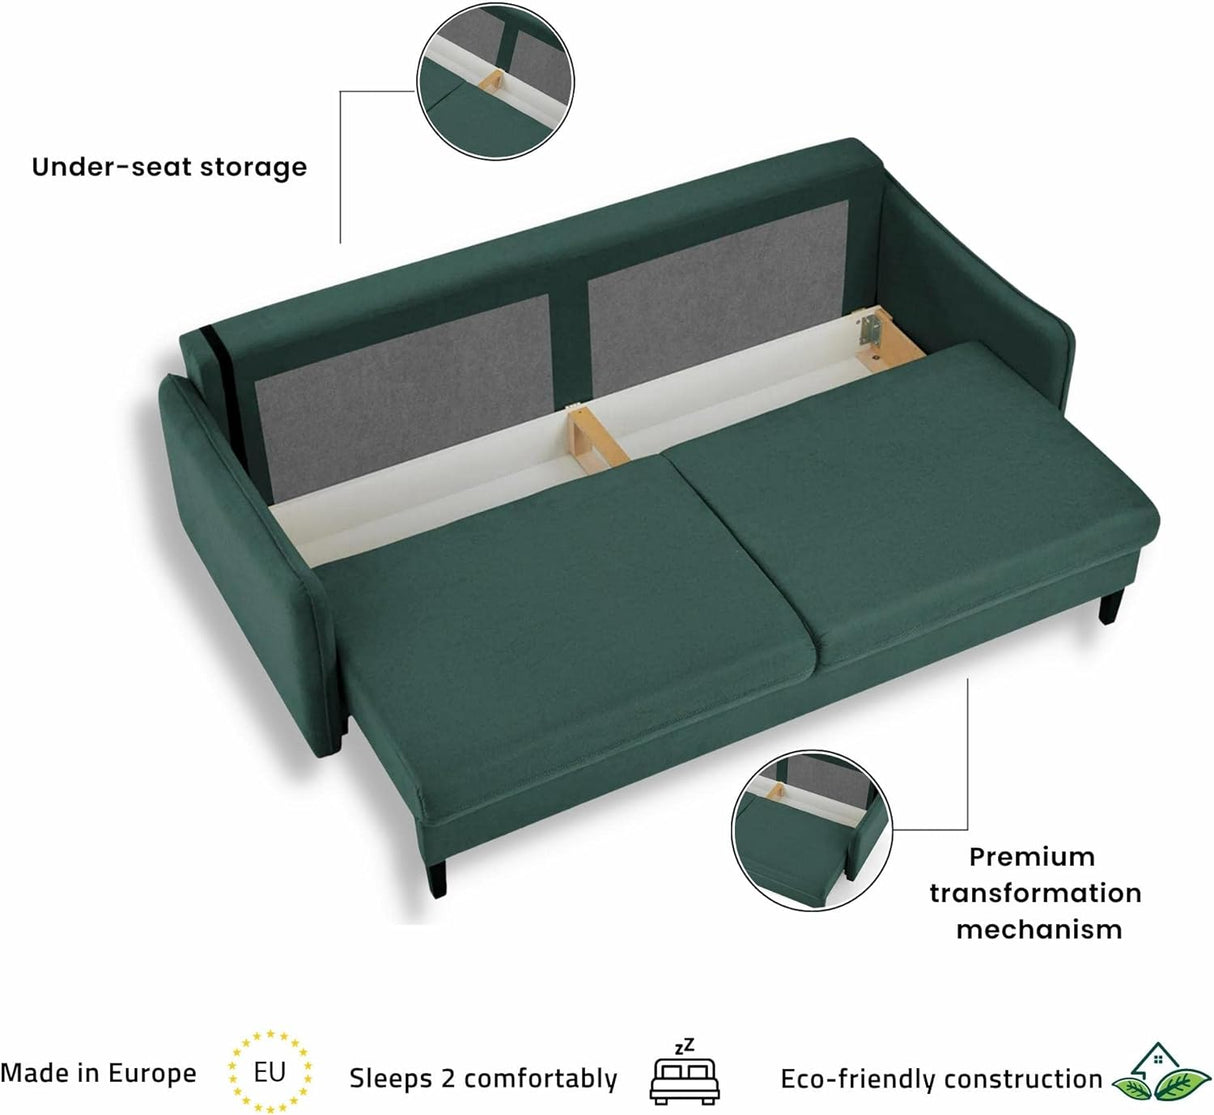 Modern Carmella Sleeper Sofa - Storage Pull Out Sofa Bed Pocket Sinuous Springs, Pine Wood Frame, Velvet Upholstery, Sleek Arms, Made in Europe, Queen Size 85In W X 39In D X 35In H – Green